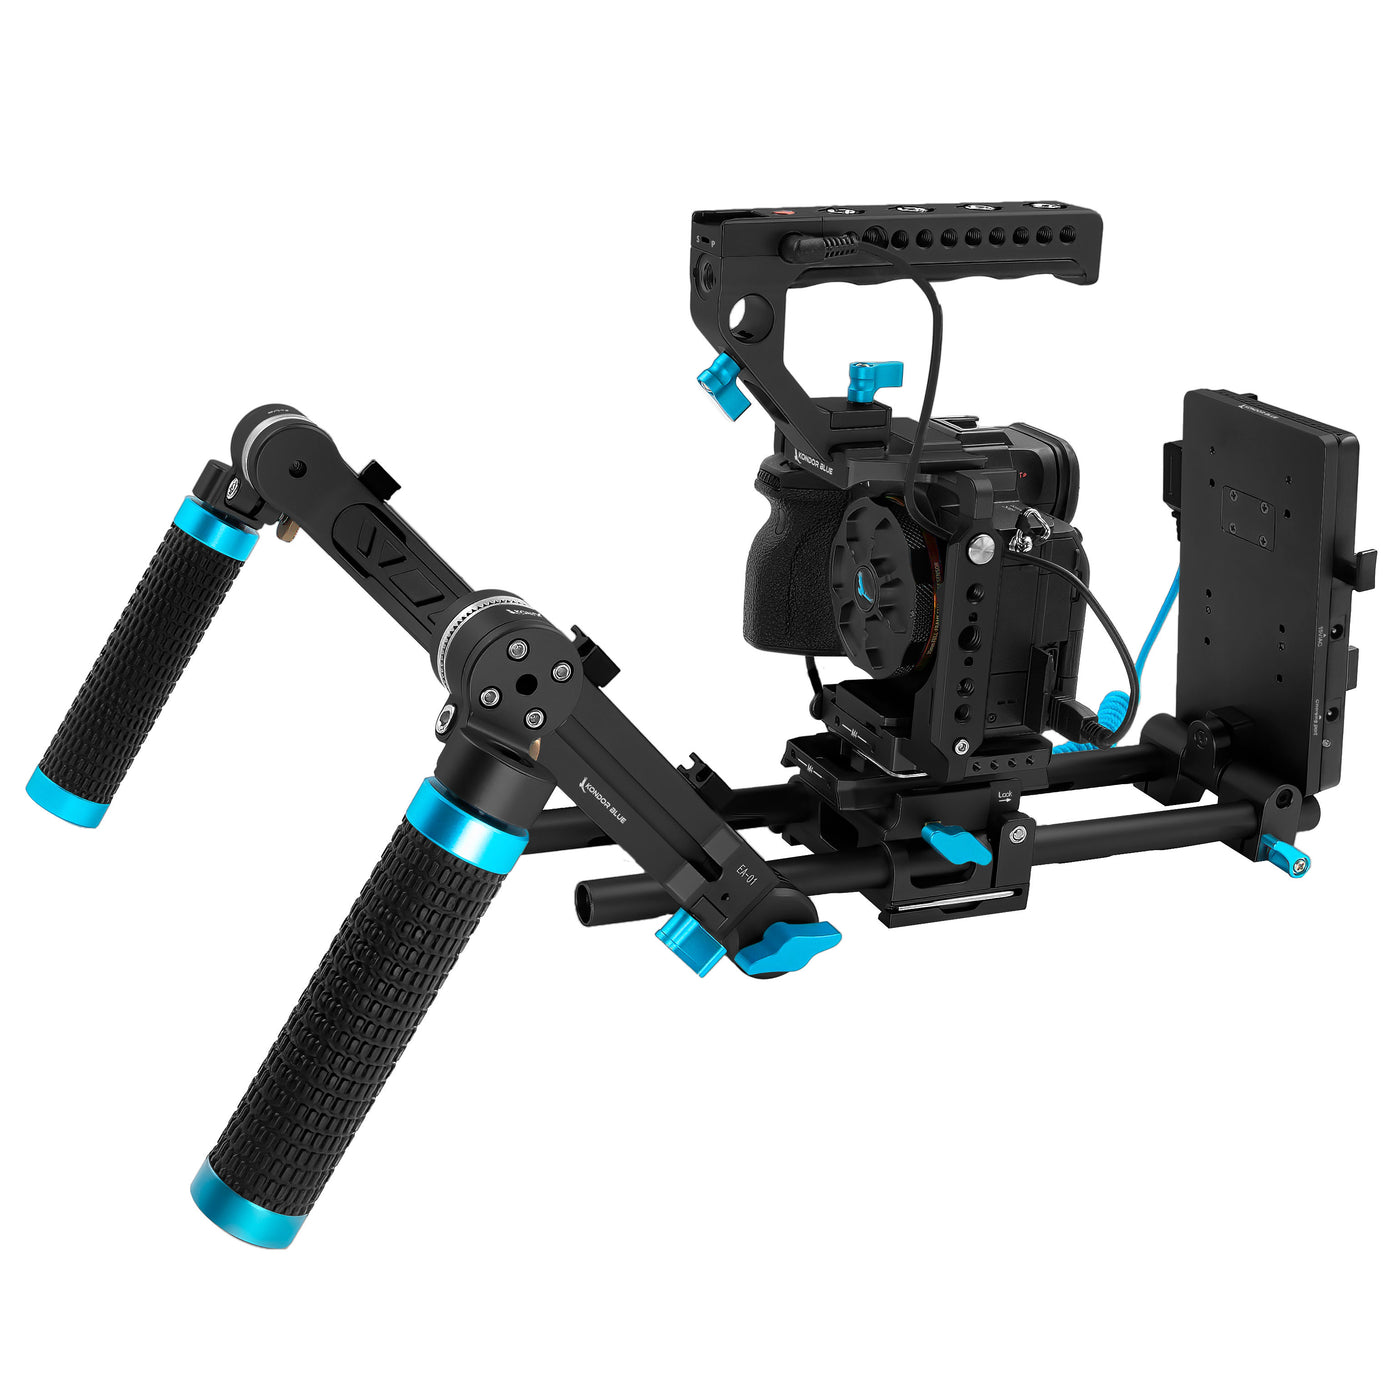 Sony A1/A7 Series Cage (A1/A7S3/A74/A7R5)